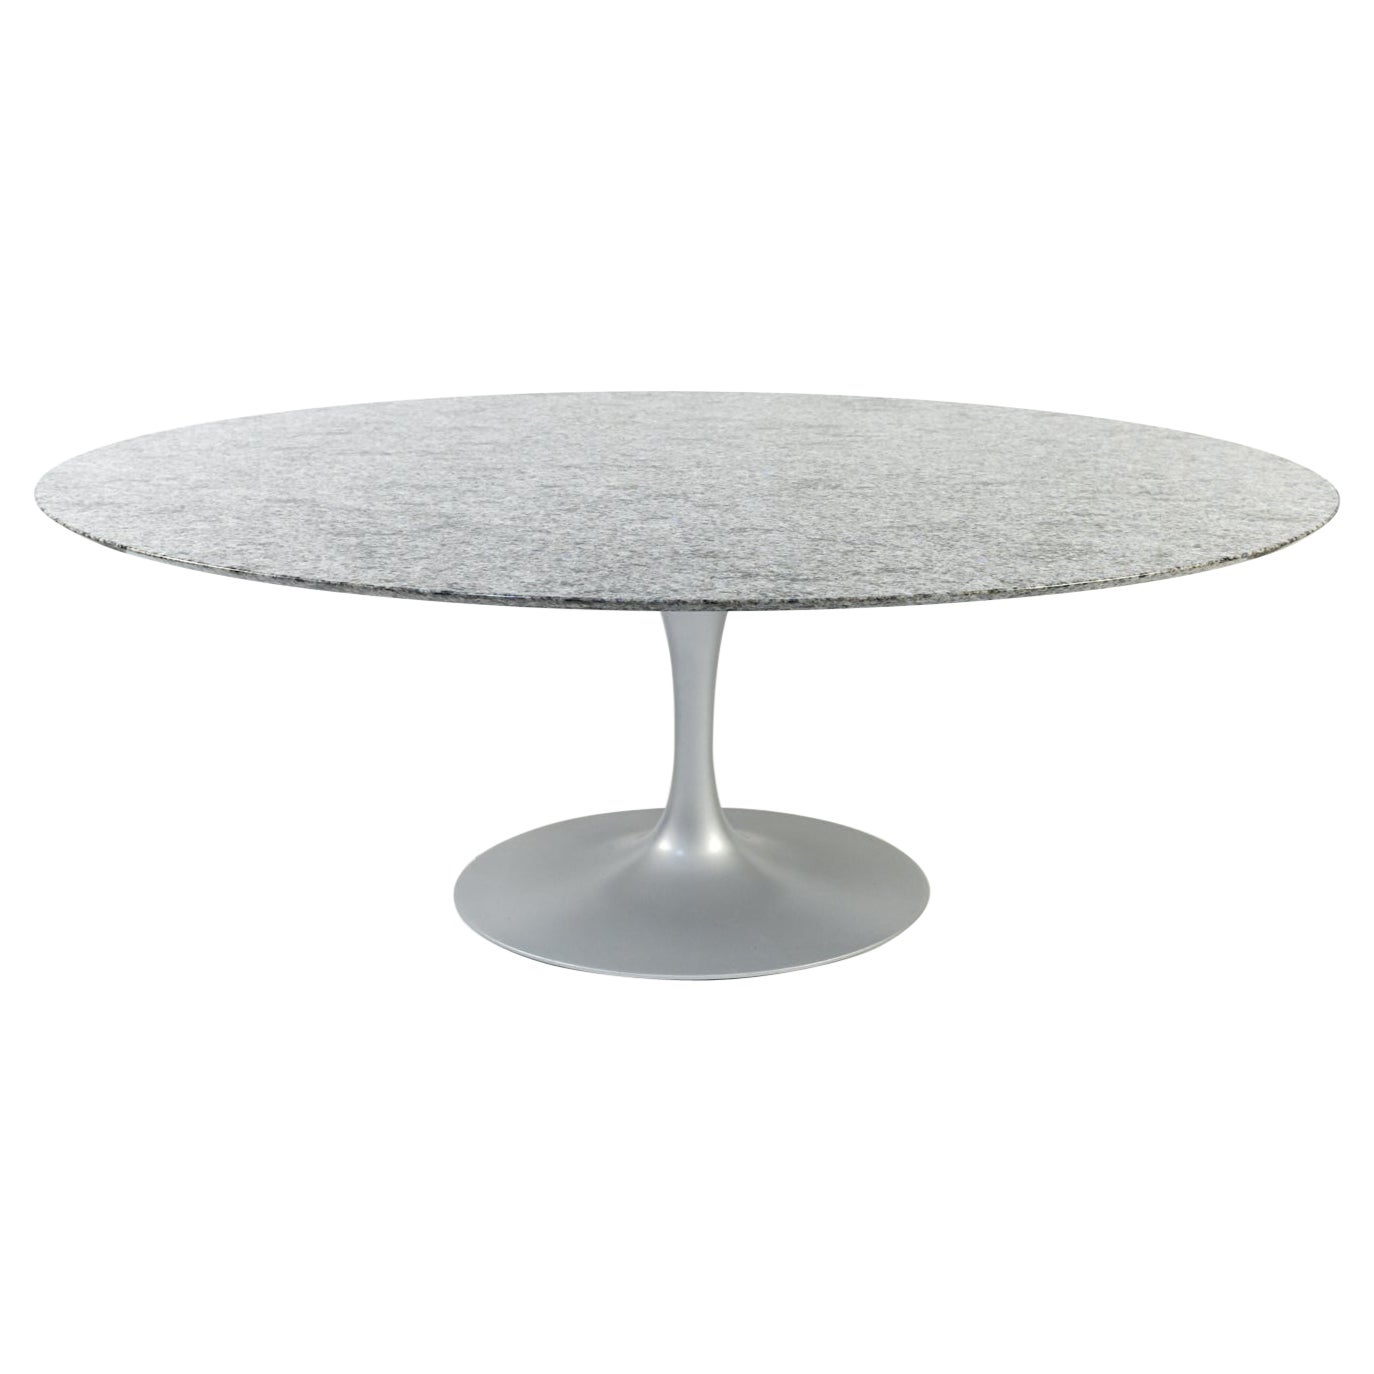 Saarinen for Knoll Oval Marble Top Dining Table